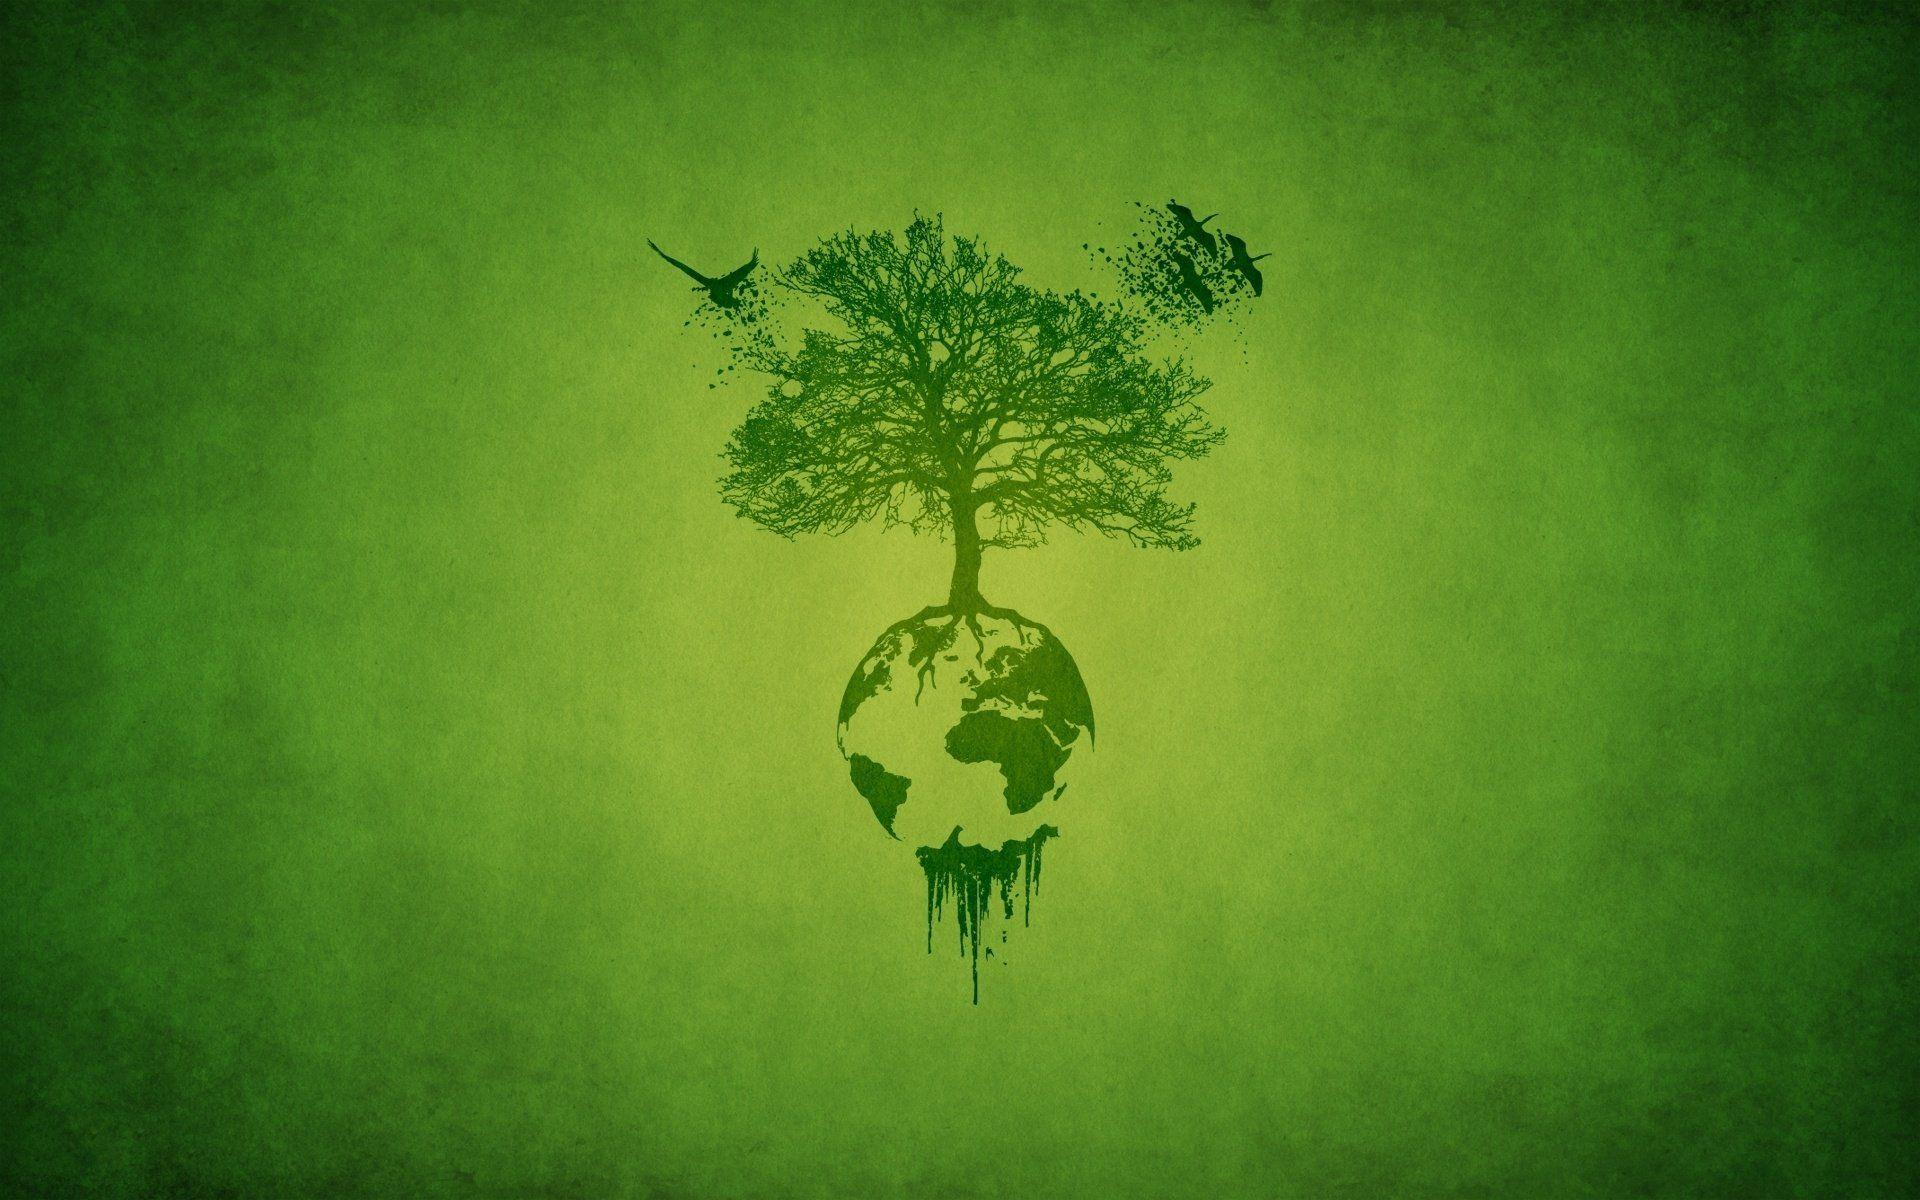 The tree of life wallpaper background